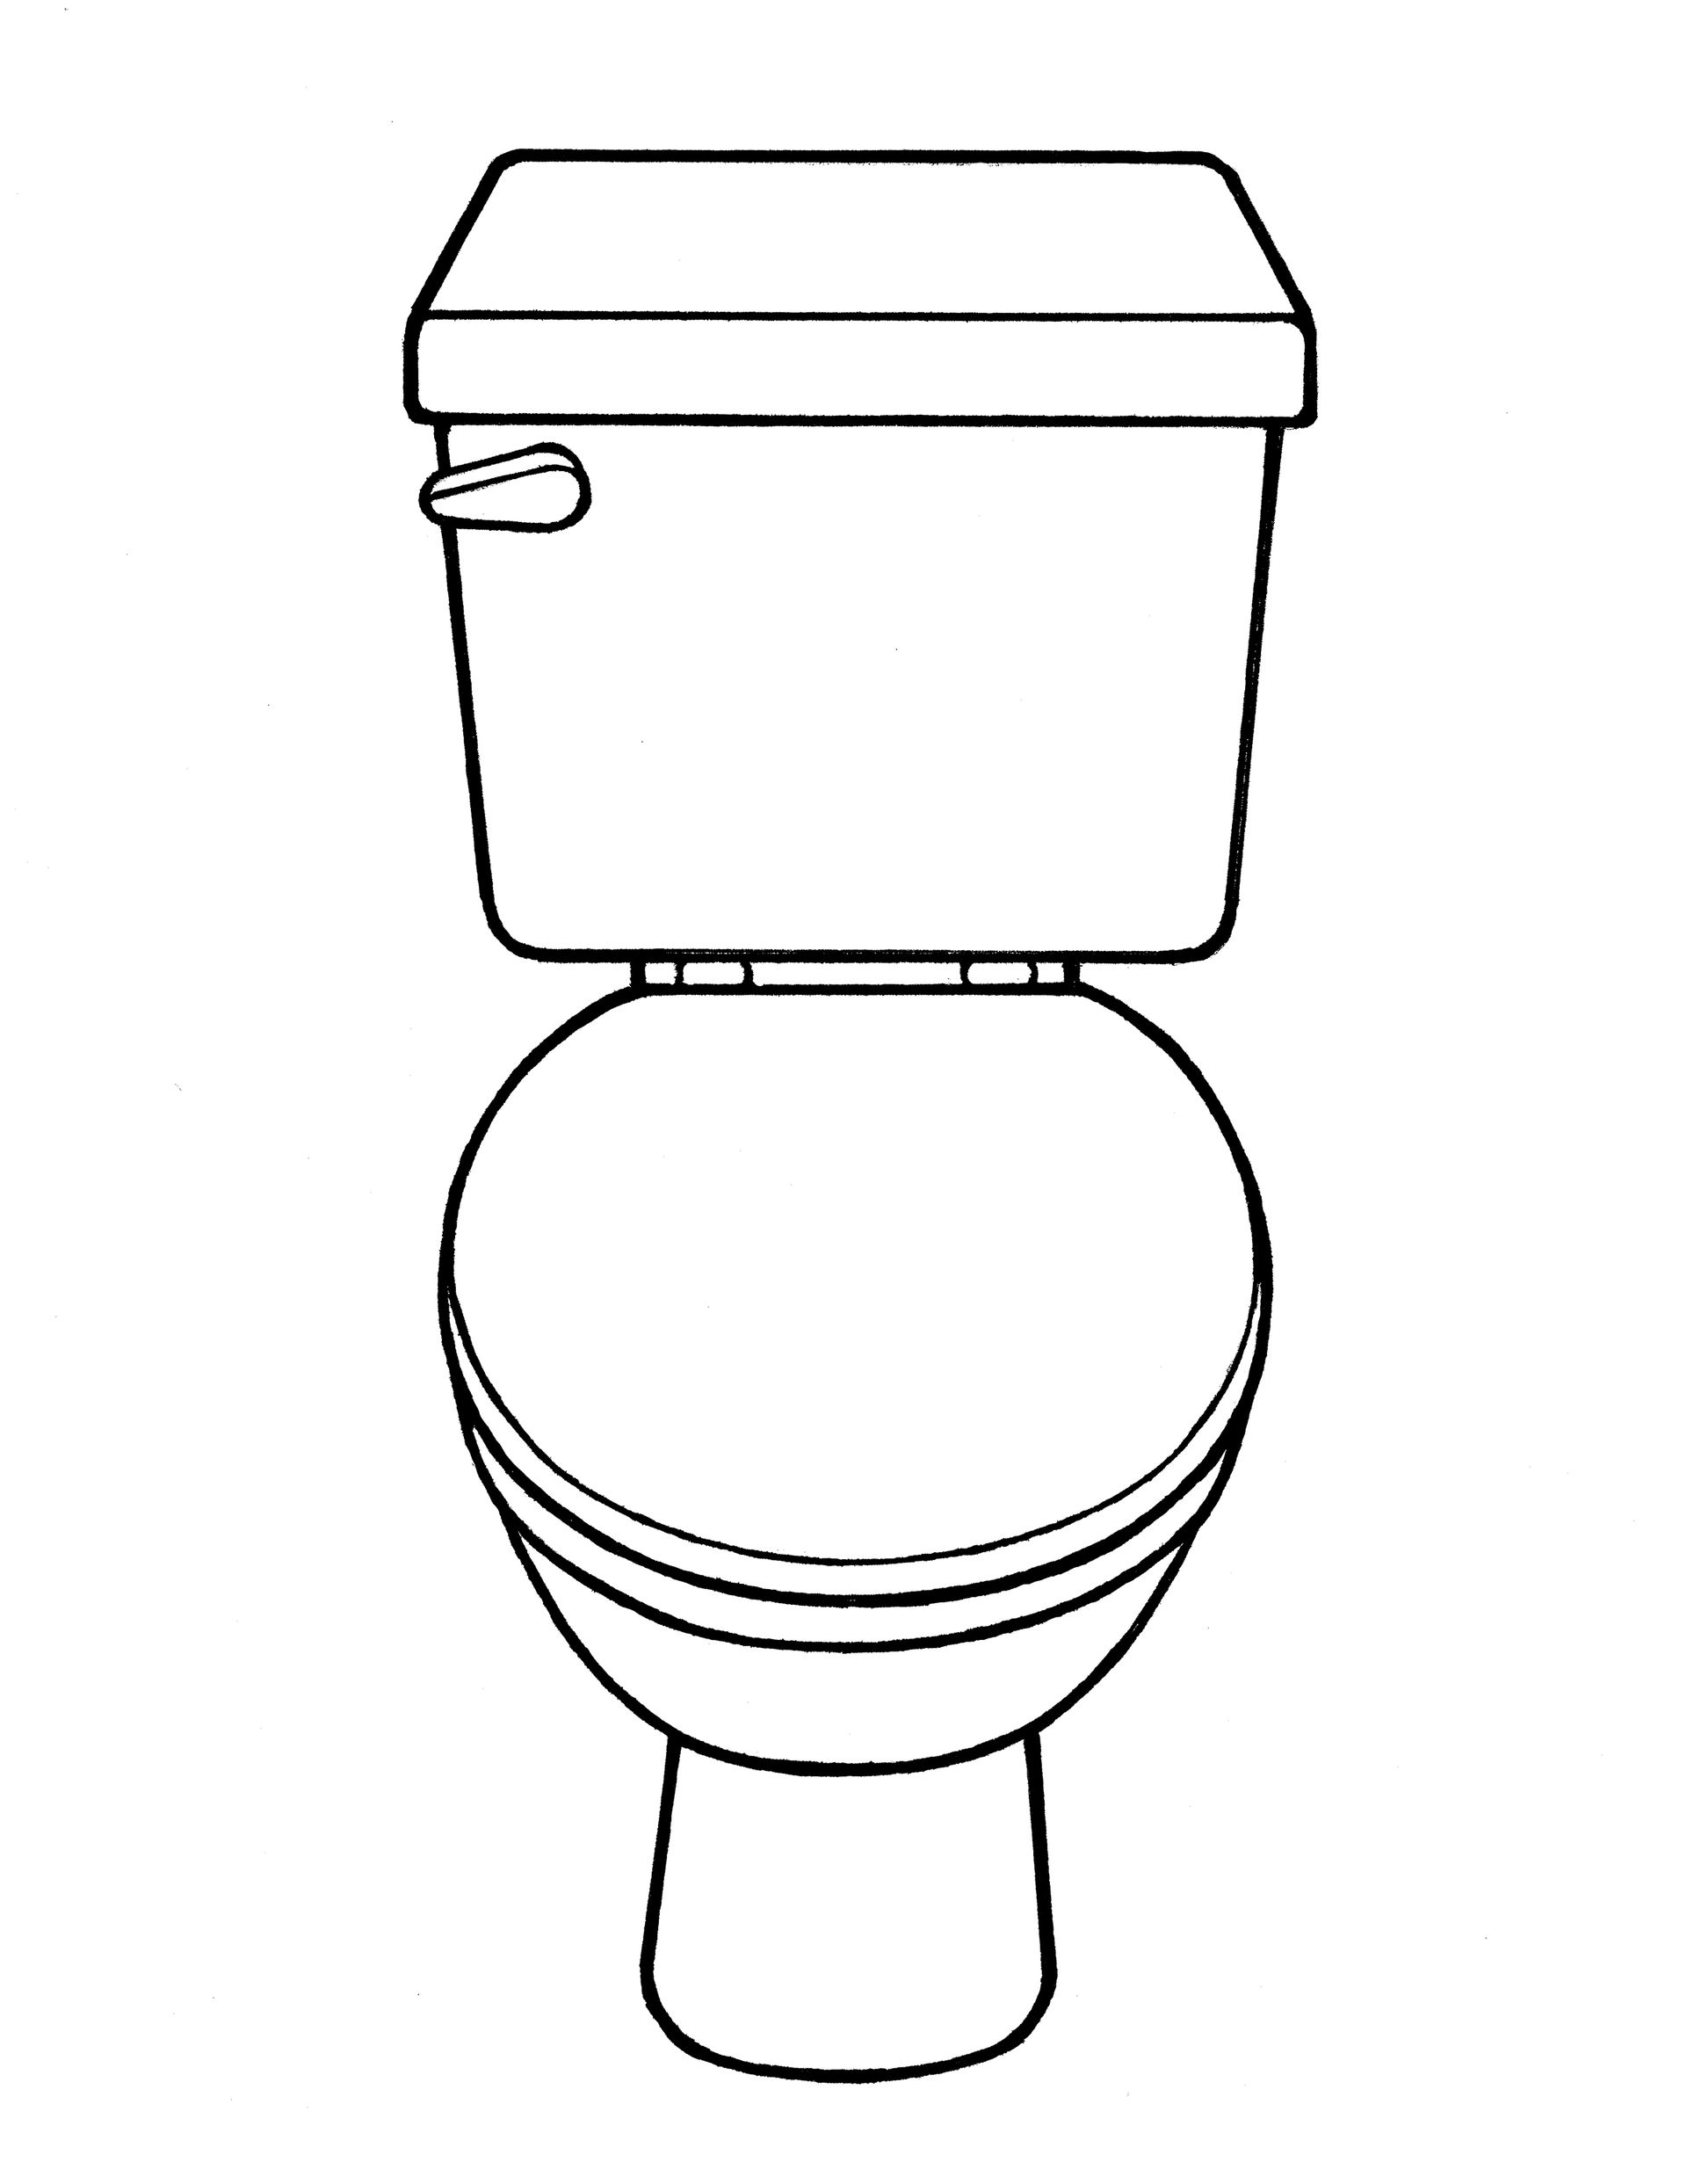 An illustration of a toilet meant to facilitate communication with small children.